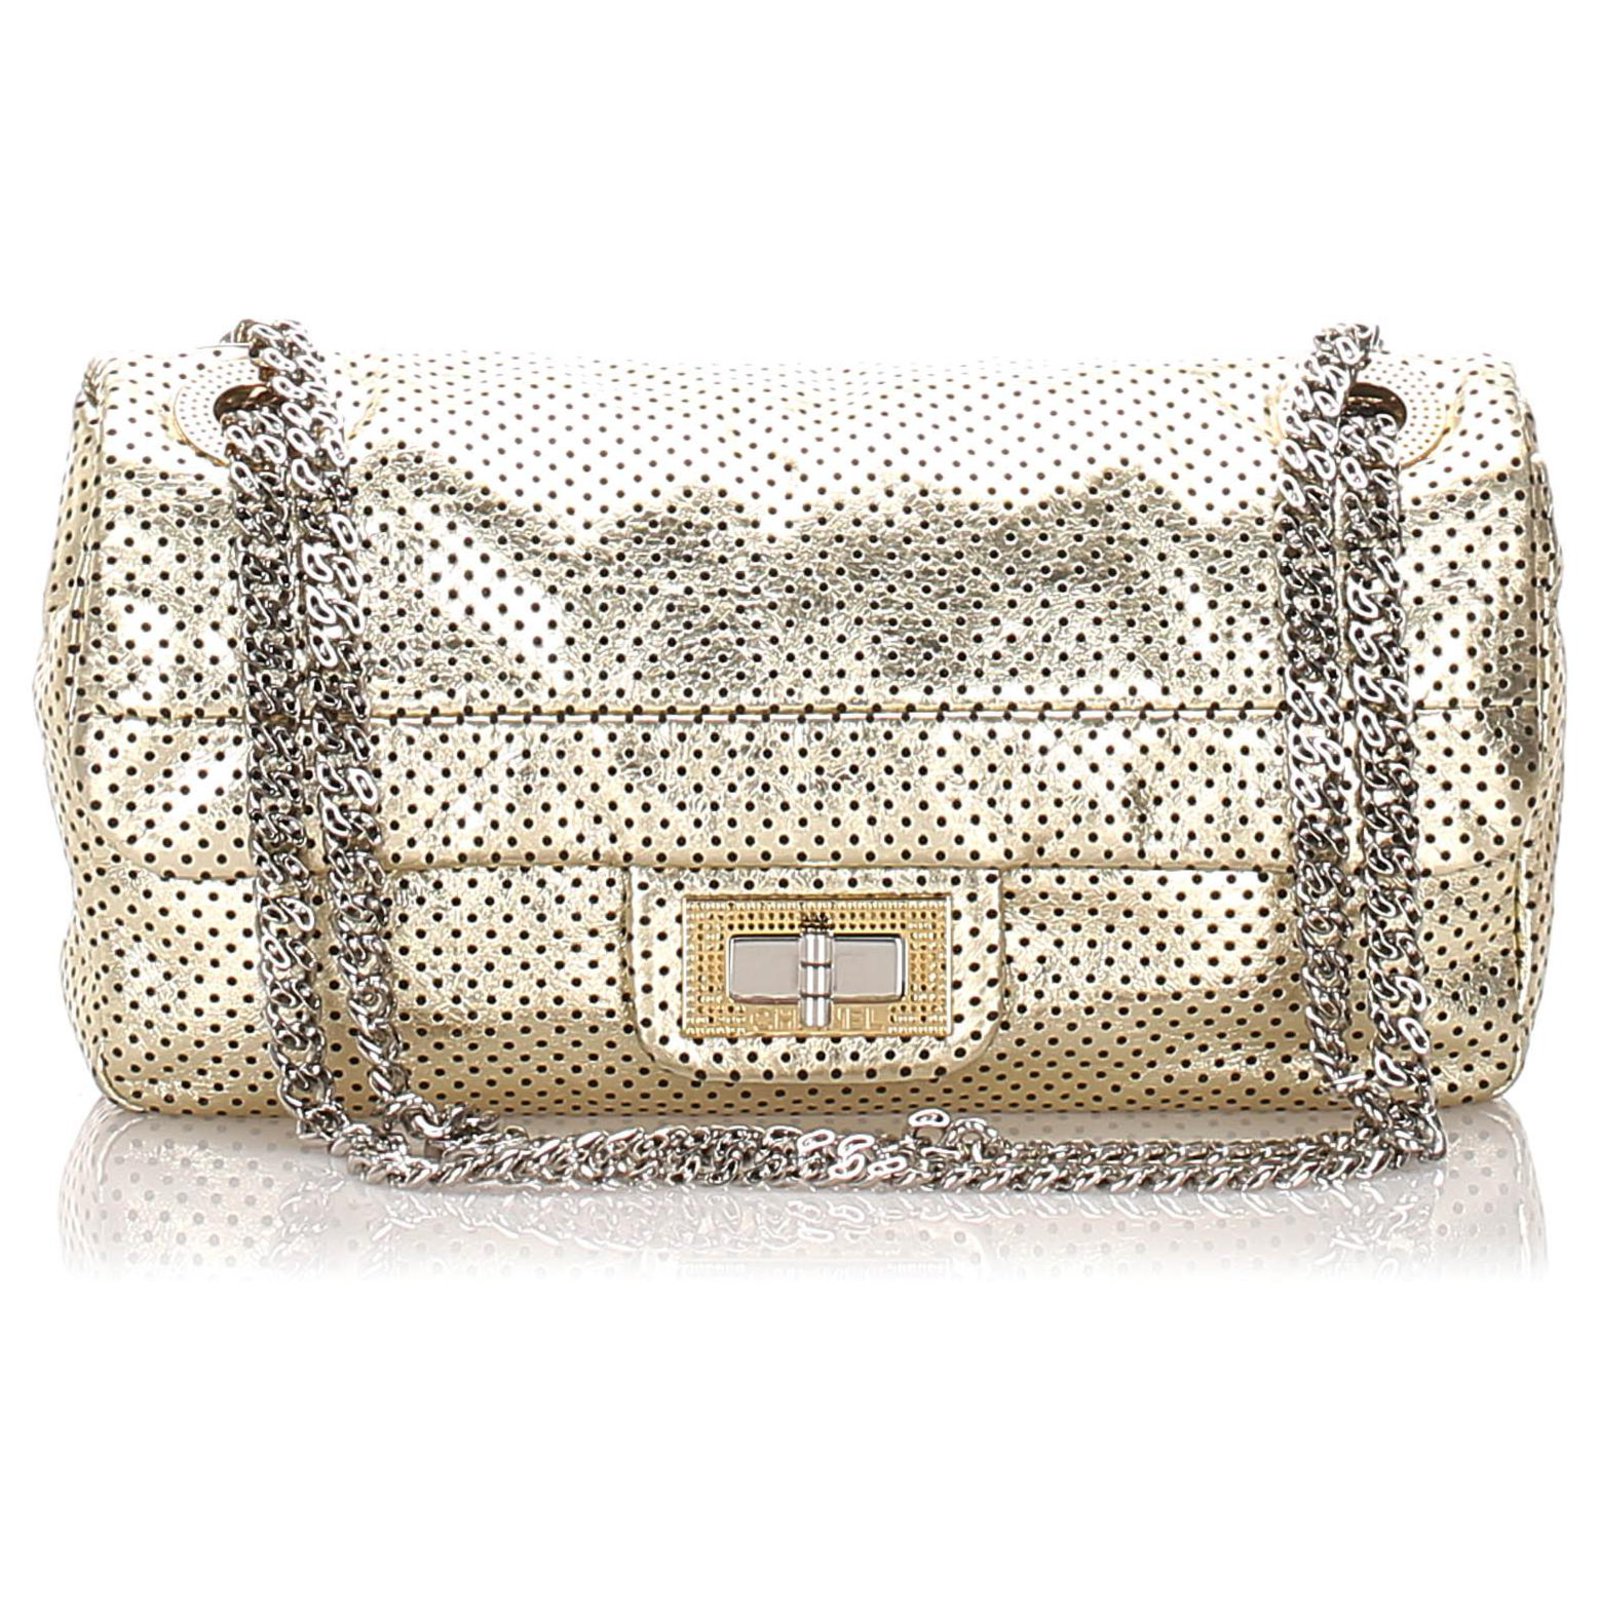 Chanel Gold Perforated Drill Leather Flap Bag Golden Pony-style